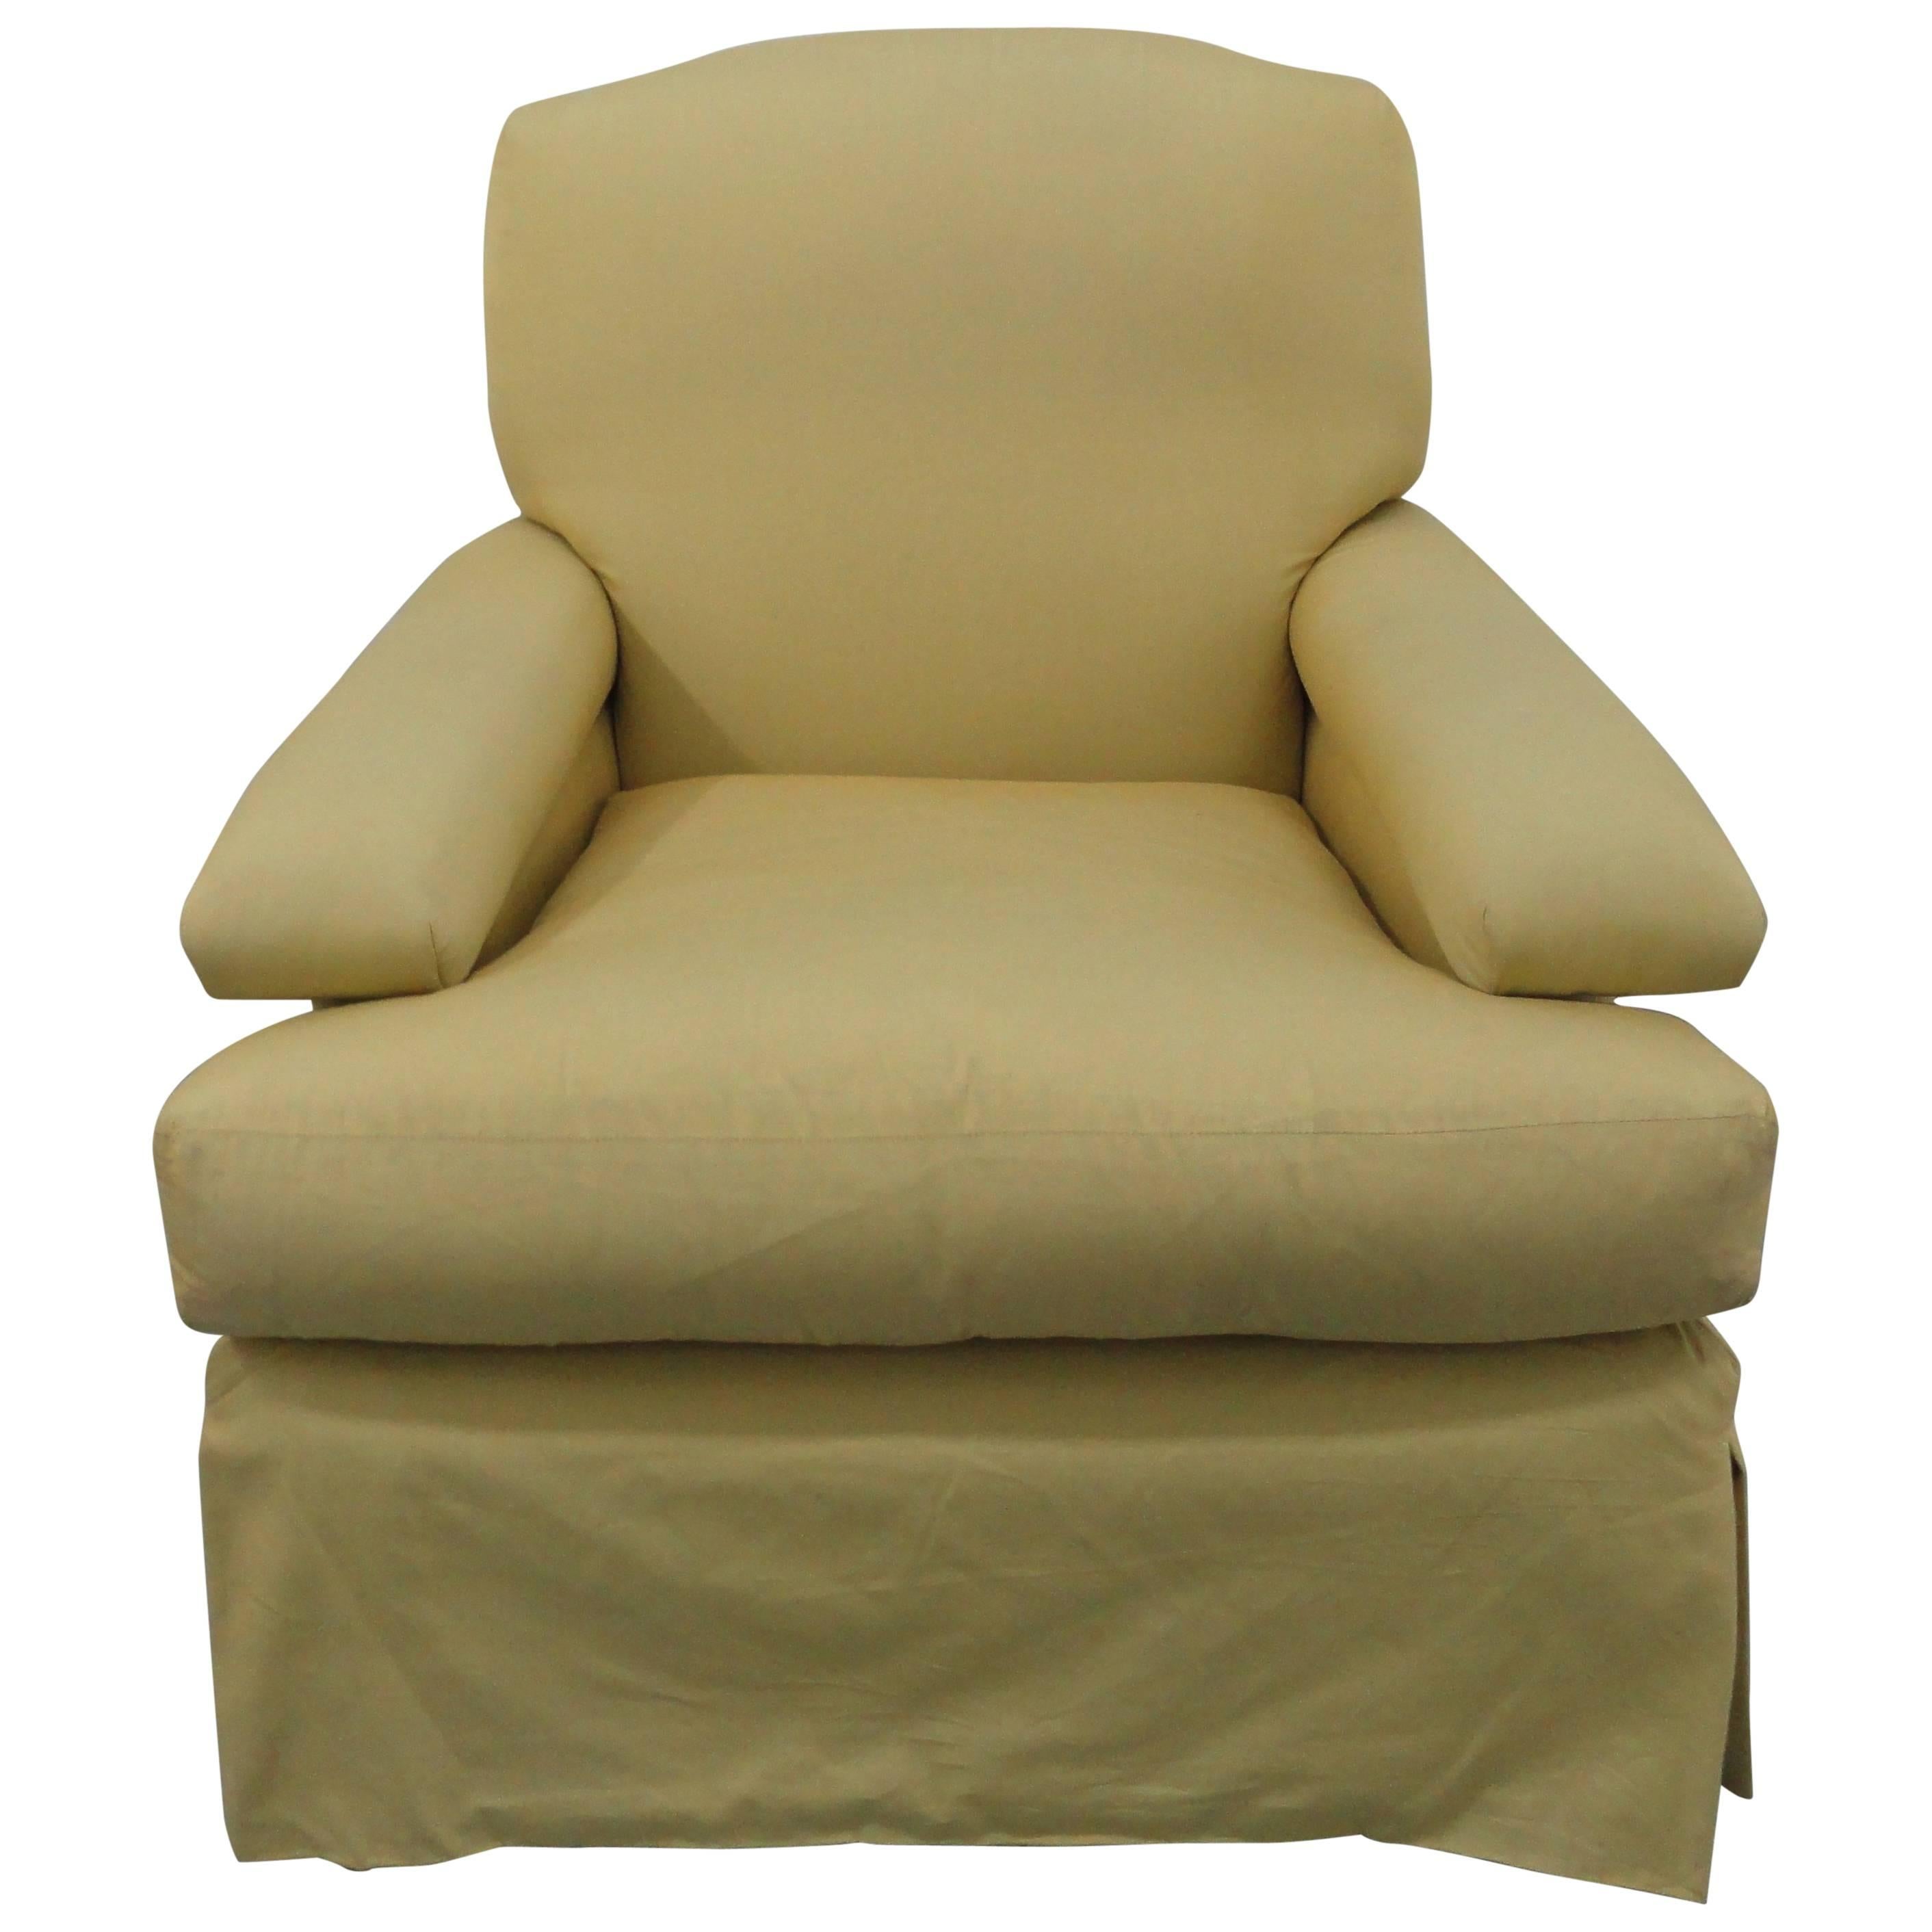 Classic Upholstered Club Chair For Sale